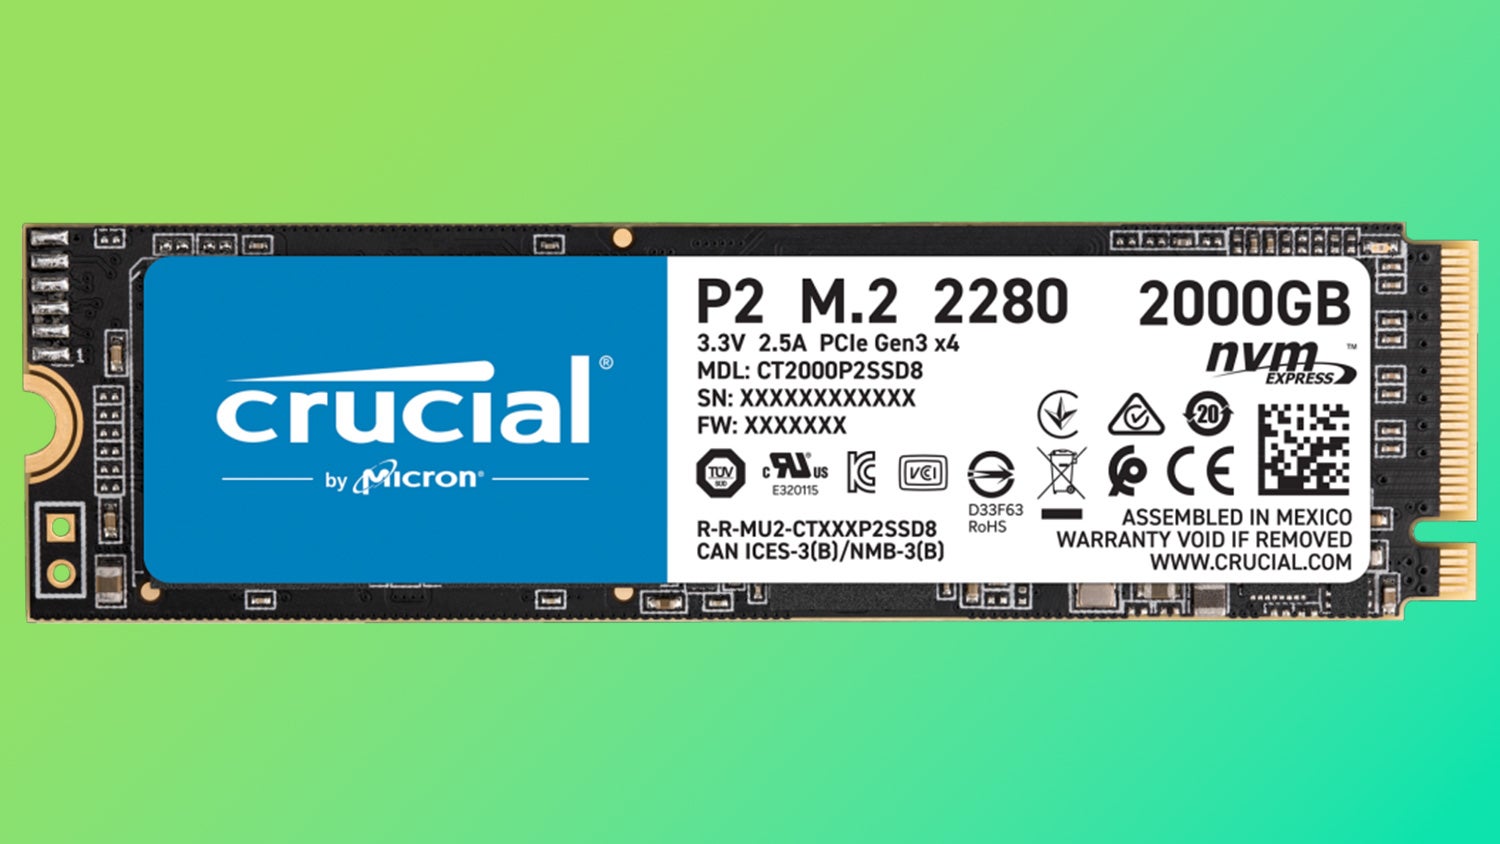 a crucial p2 nvme ssd, in a 2tb capacity. The drive comes in an M.2 form factor, suitable for newer desktops and laptops.